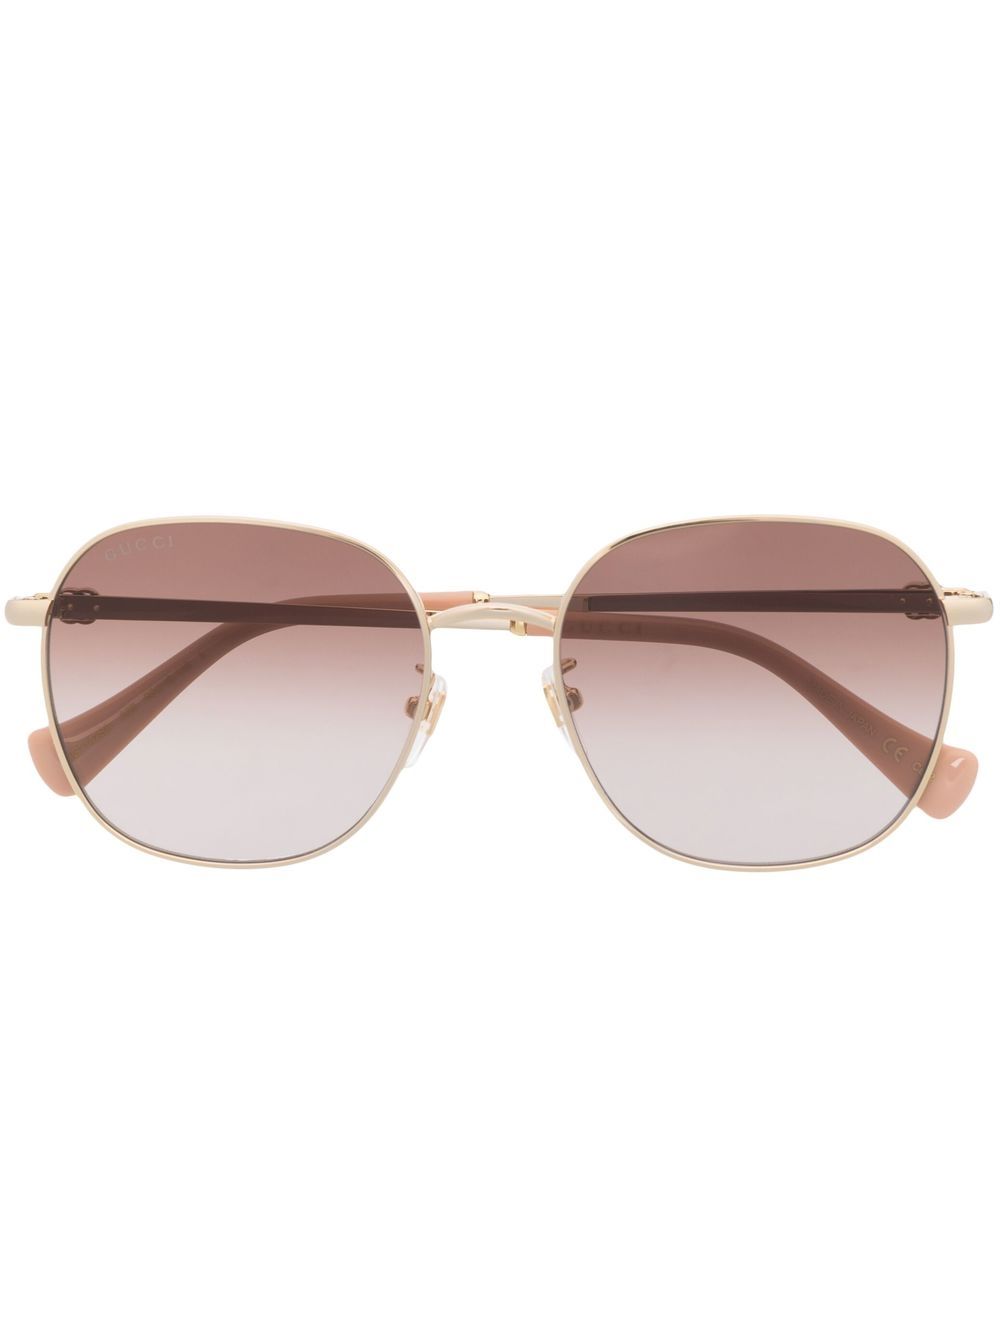 Gucci Low Nose Round Sunglasses Gold w/Brown Lens | Fashion Clinic